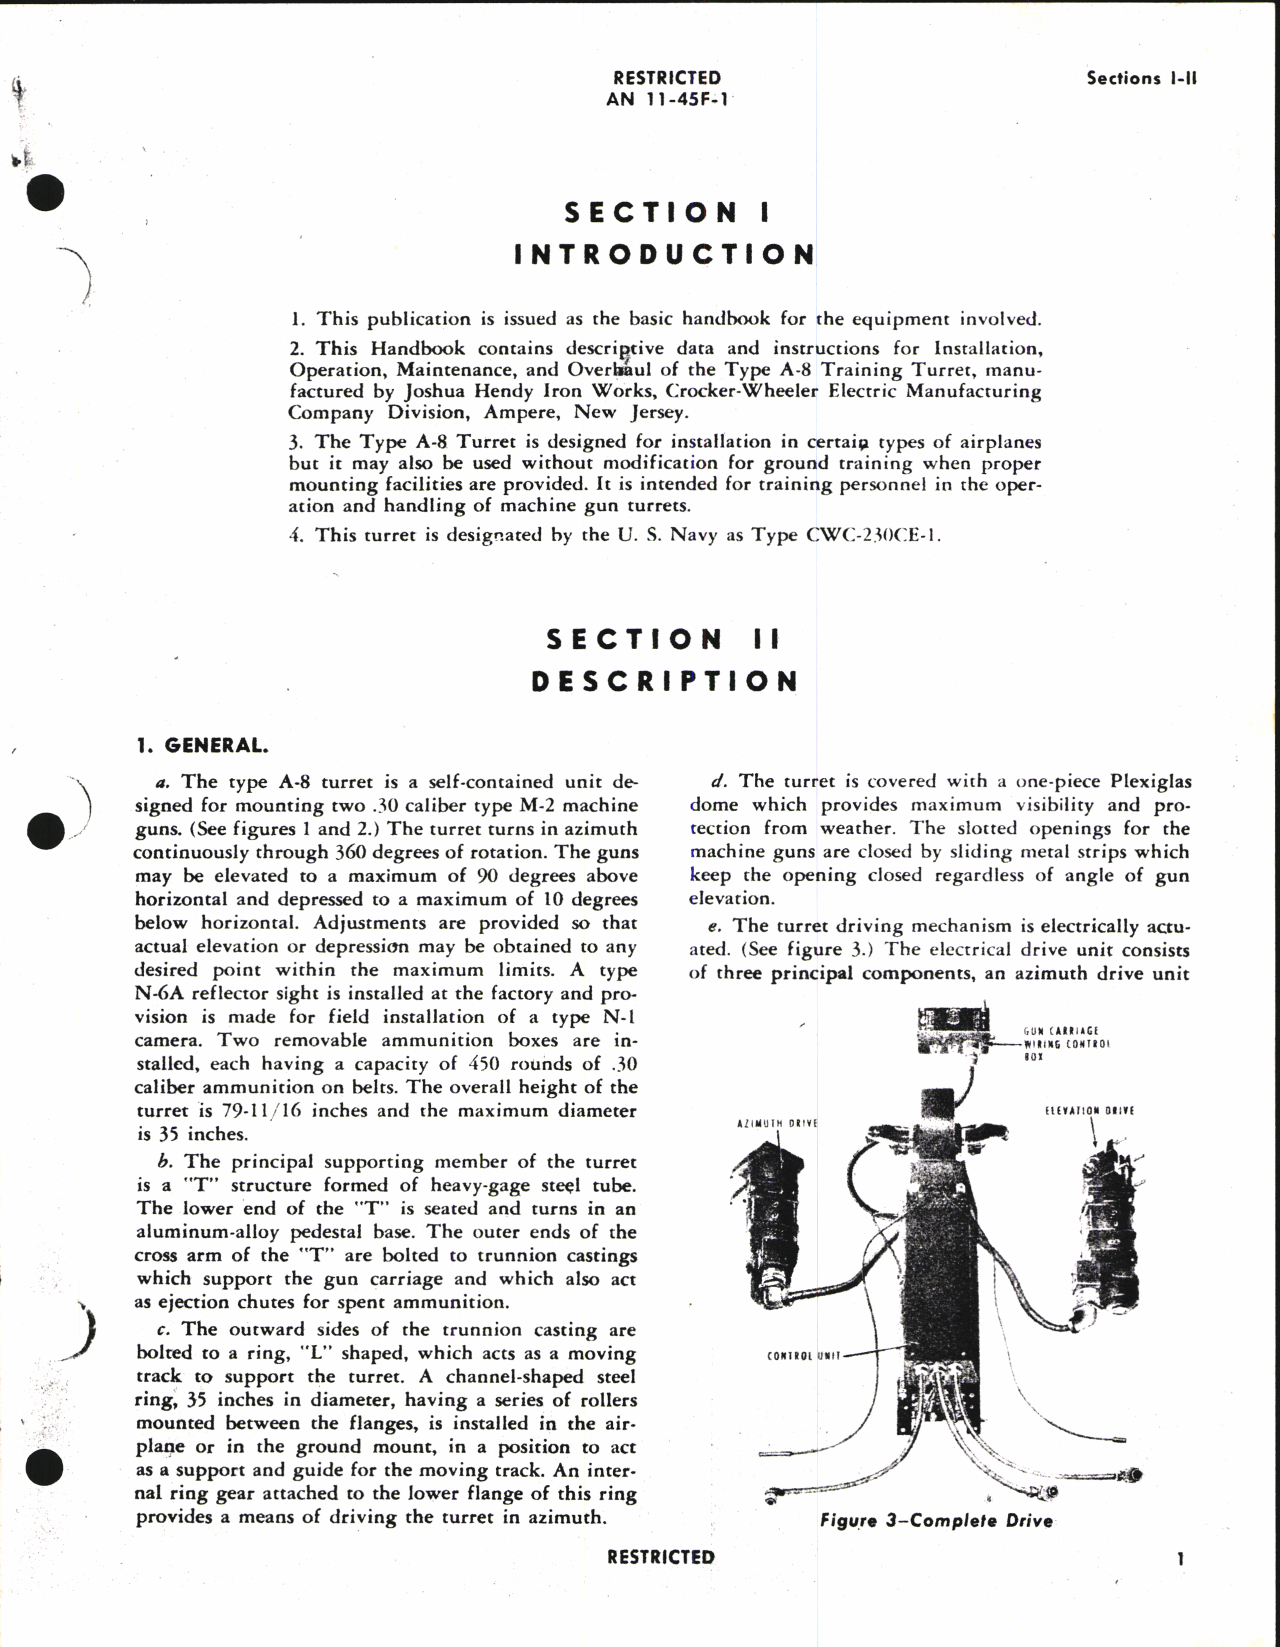 Sample page 5 from AirCorps Library document: Handbook of Instructions with Parts Catalog for Training Turret Type A-8